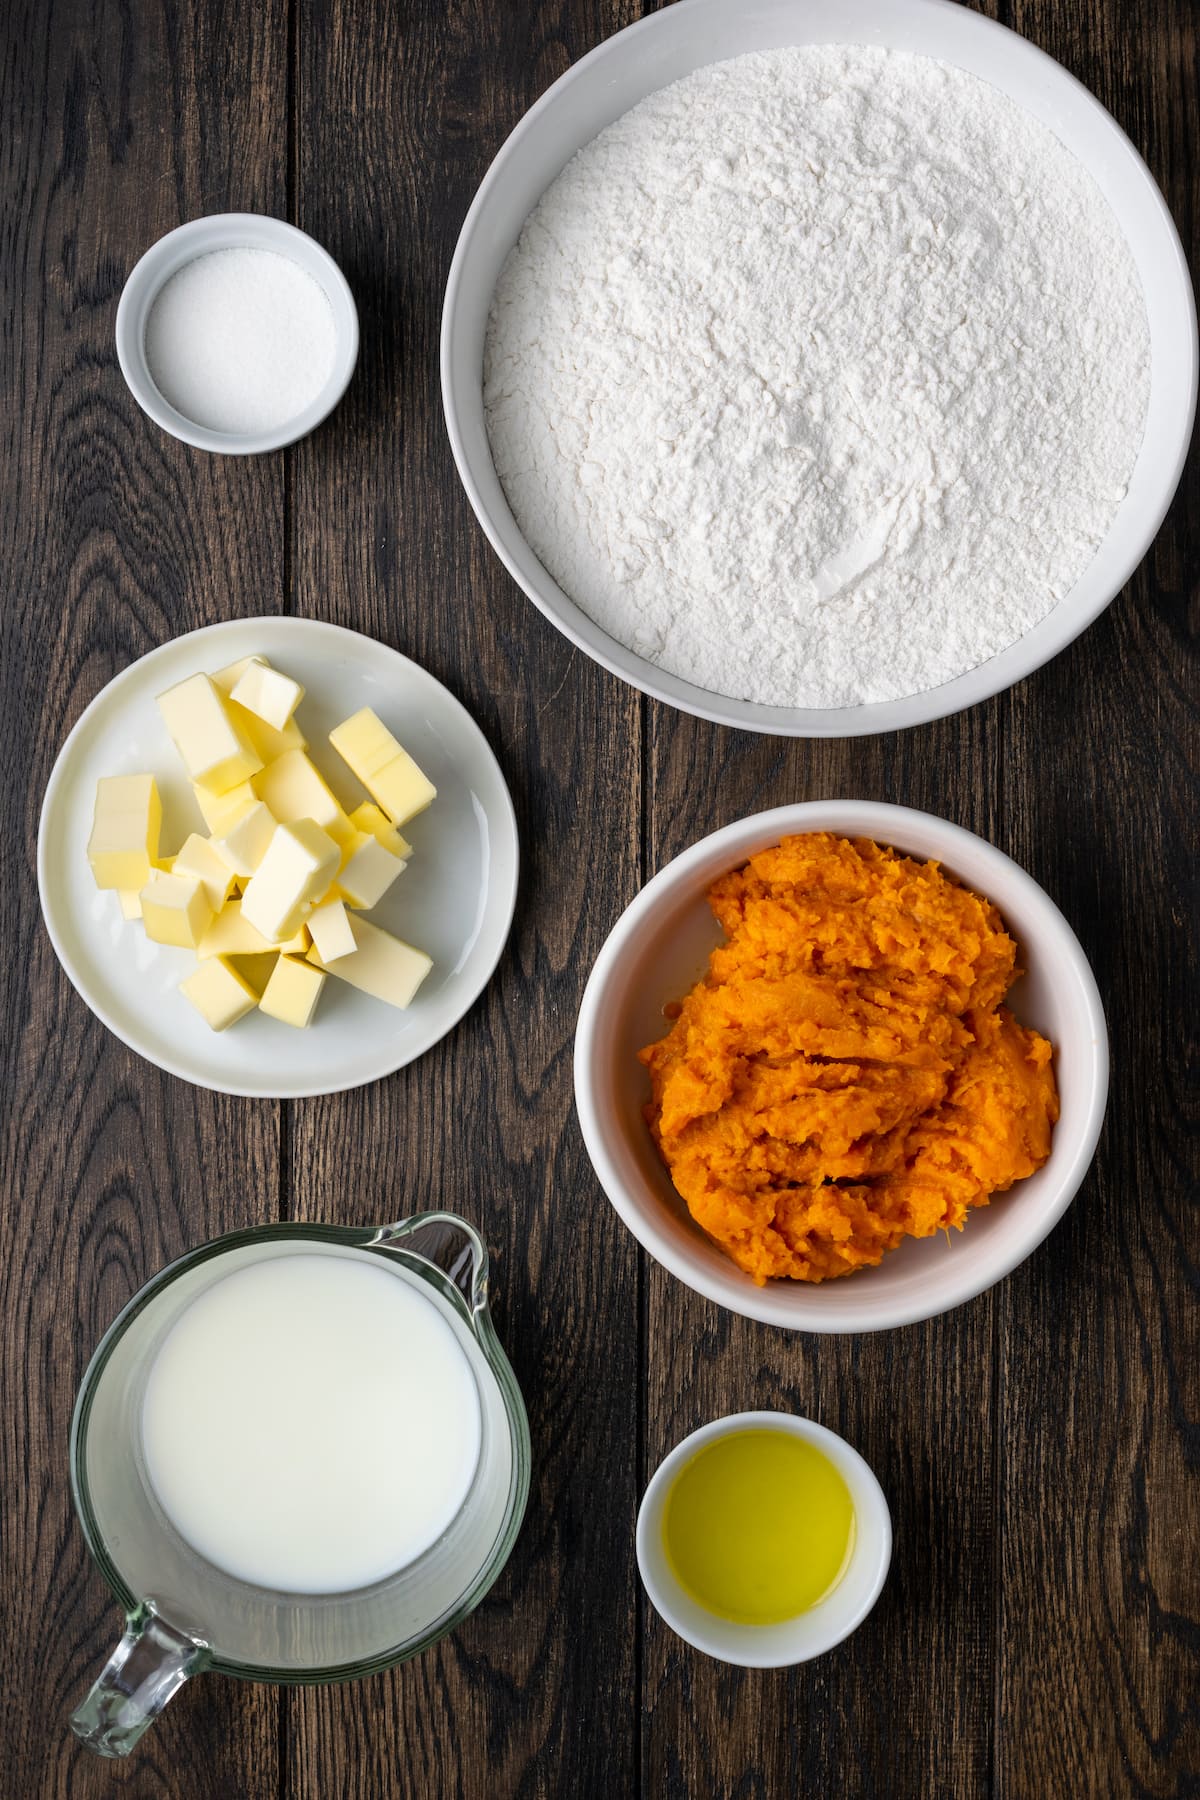 The ingredients for sweet potato biscuits.